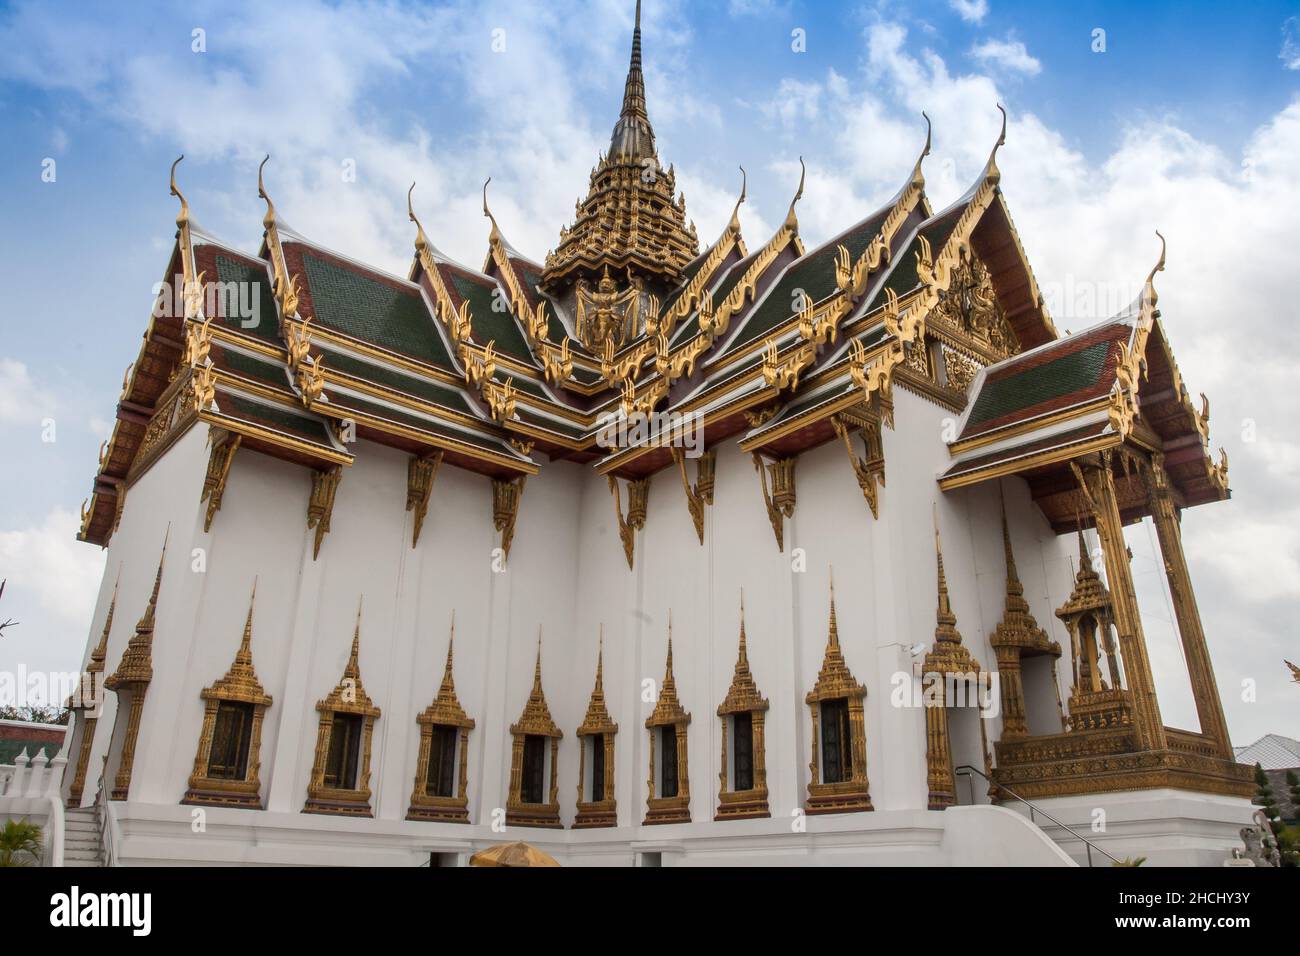 Dusit Maha Prasat Hall - a residence & audience hall was primarily used by Kings, Queens Royal Members an Historical Landmark at Grand Palace, Bangkok Stock Photo